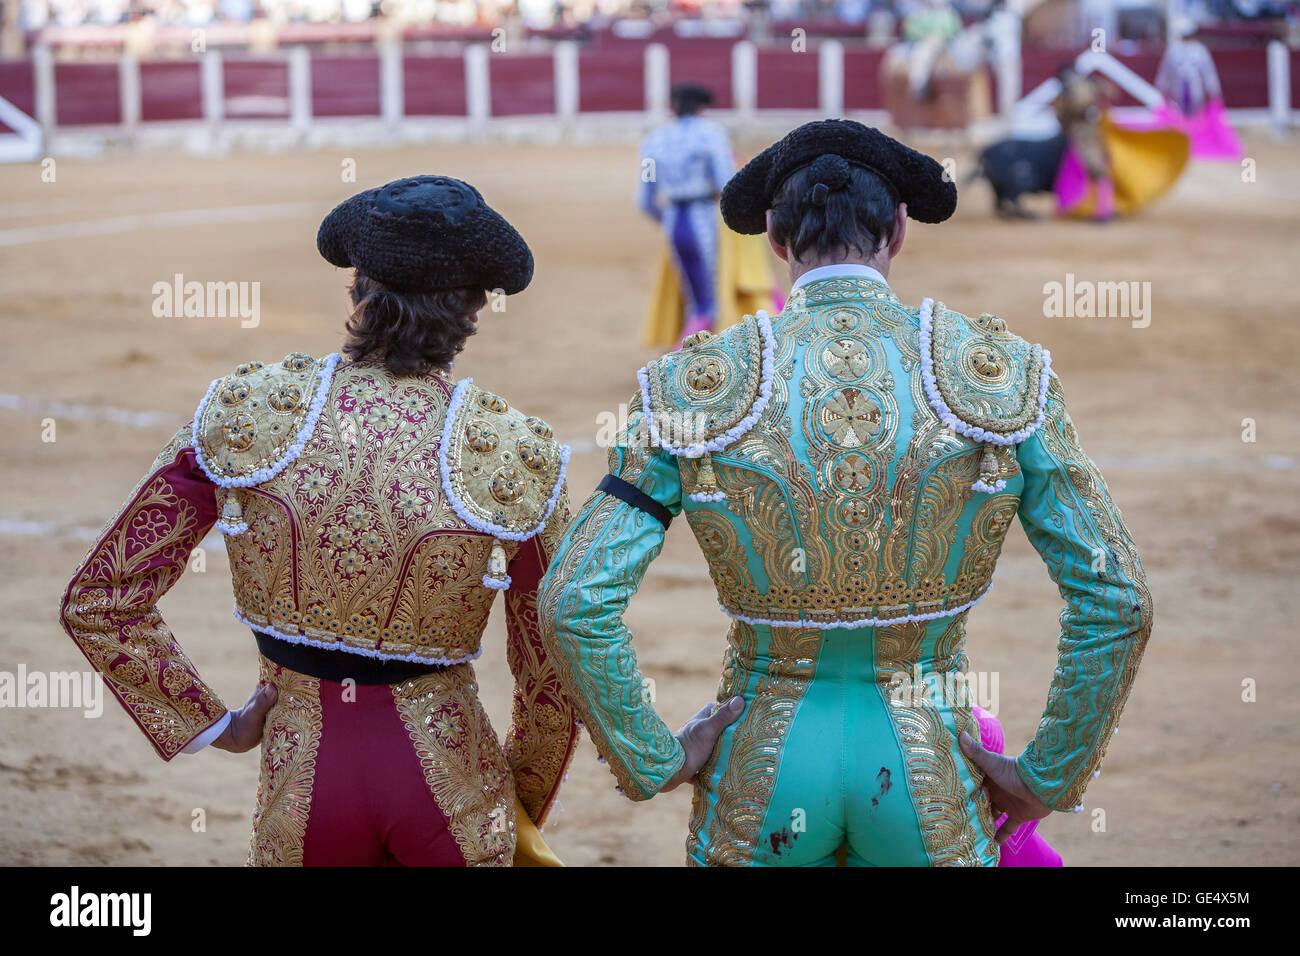 Spanish Bullfighters looking bullfighting, the Bullfighter on the left dressed in suit of lights of colors red and gold and the Stock Photo